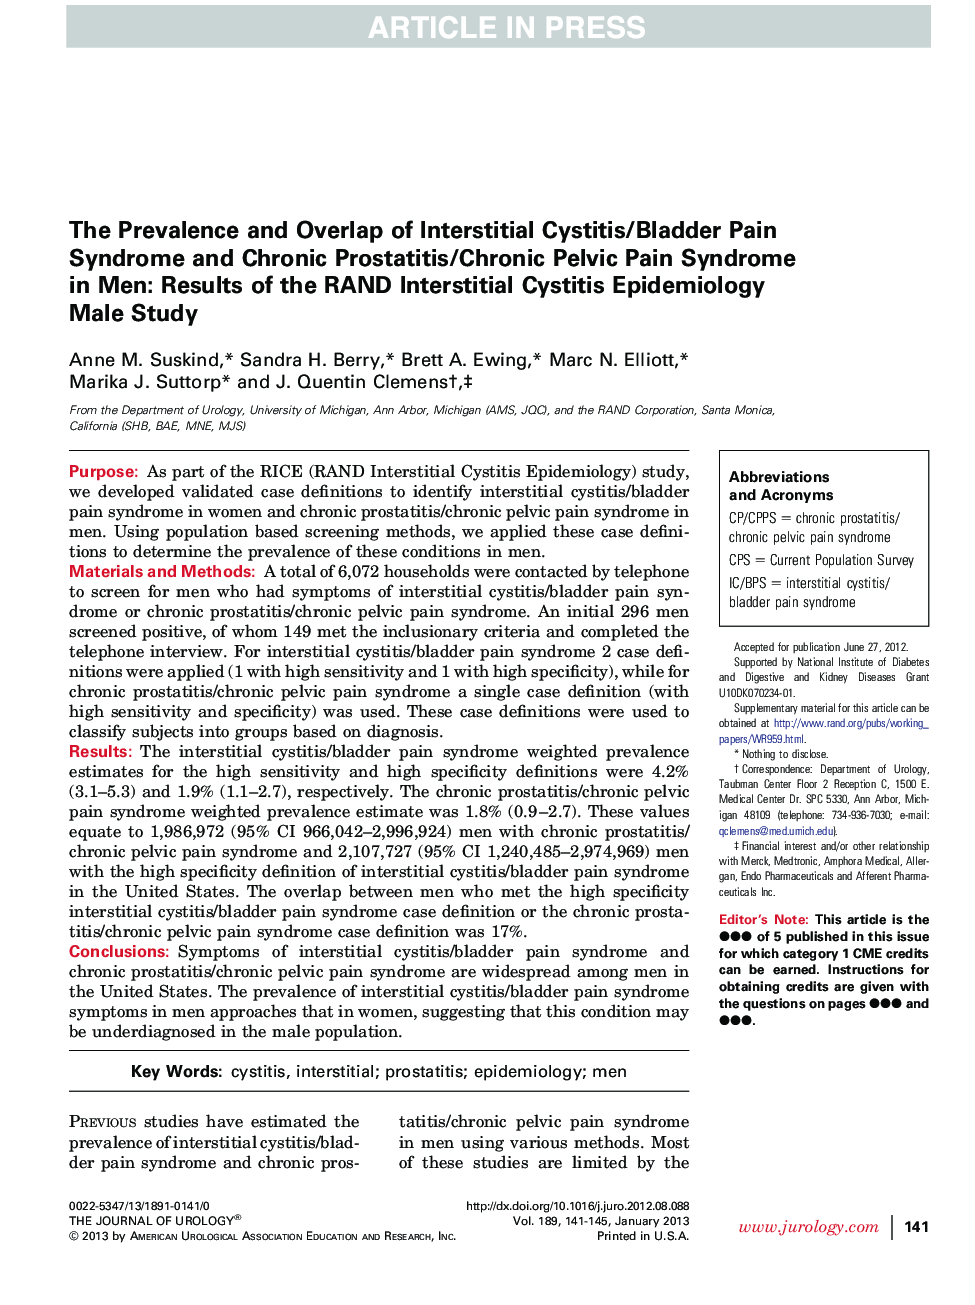 The Prevalence and Overlap of Interstitial Cystitis/Bladder Pain Syndrome and Chronic Prostatitis/Chronic Pelvic Pain Syndrome in Men: Results of the RAND Interstitial Cystitis Epidemiology Male Study